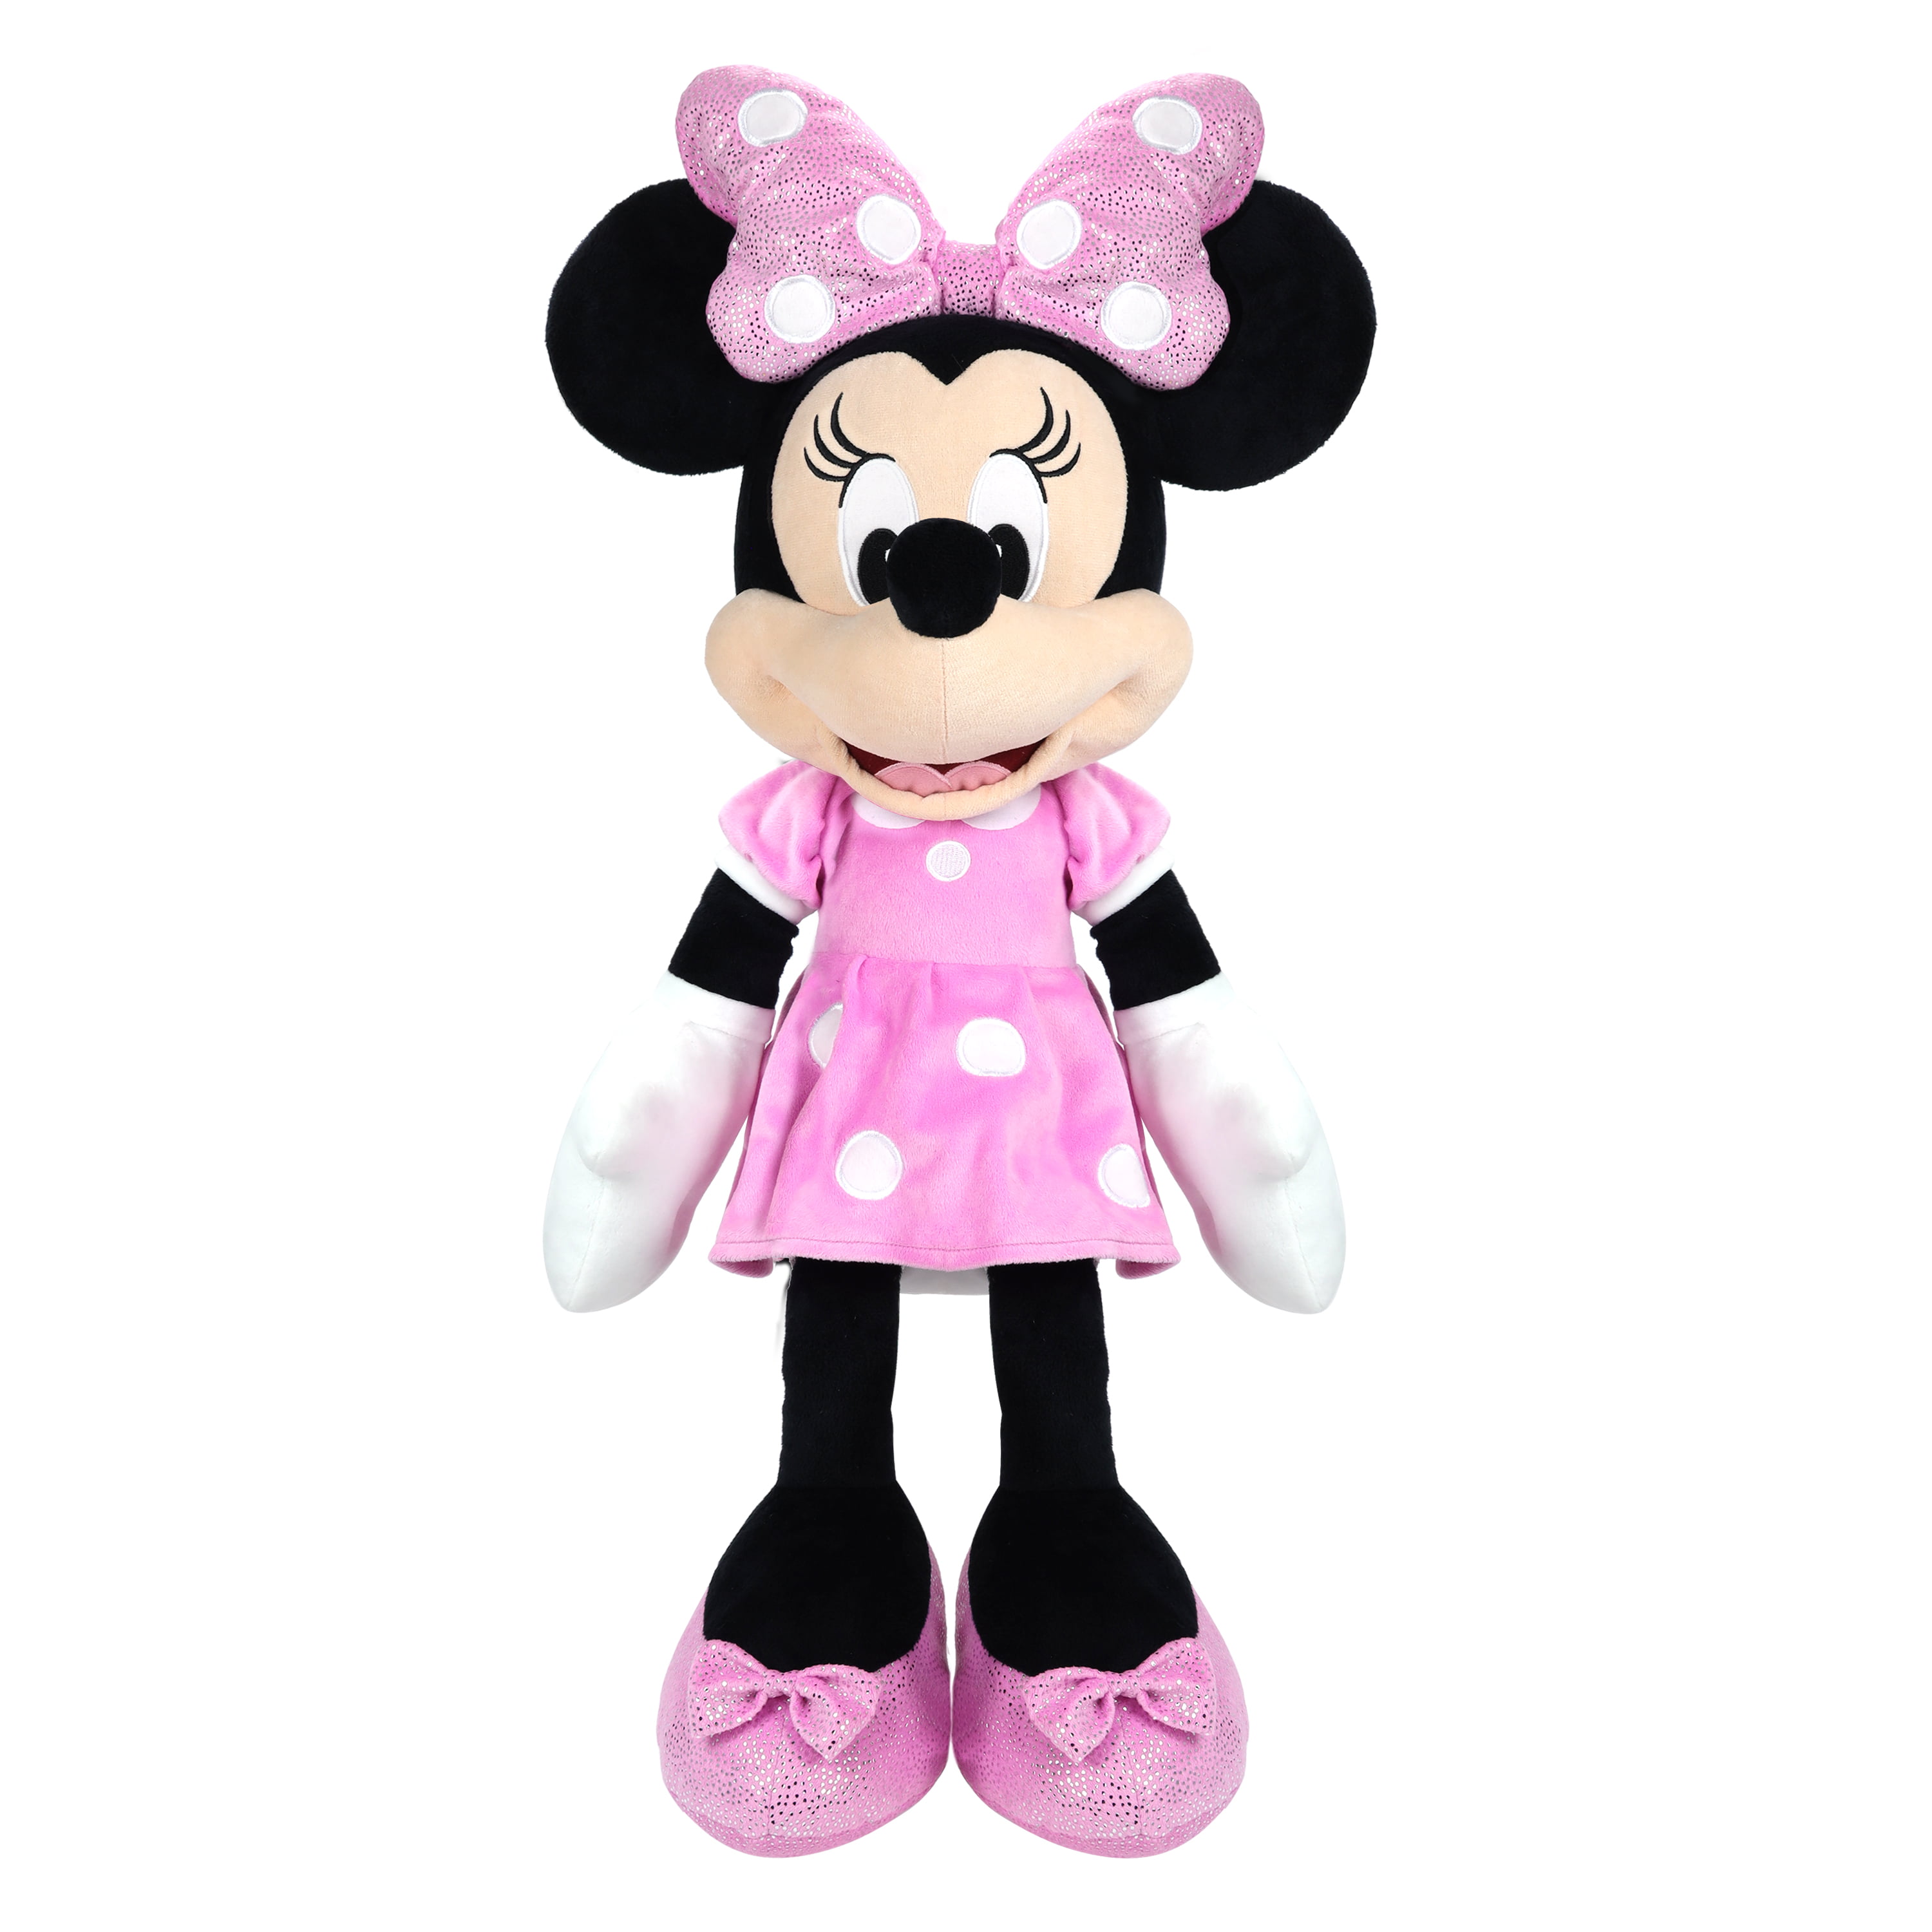 minnie mouse toys for baby girl